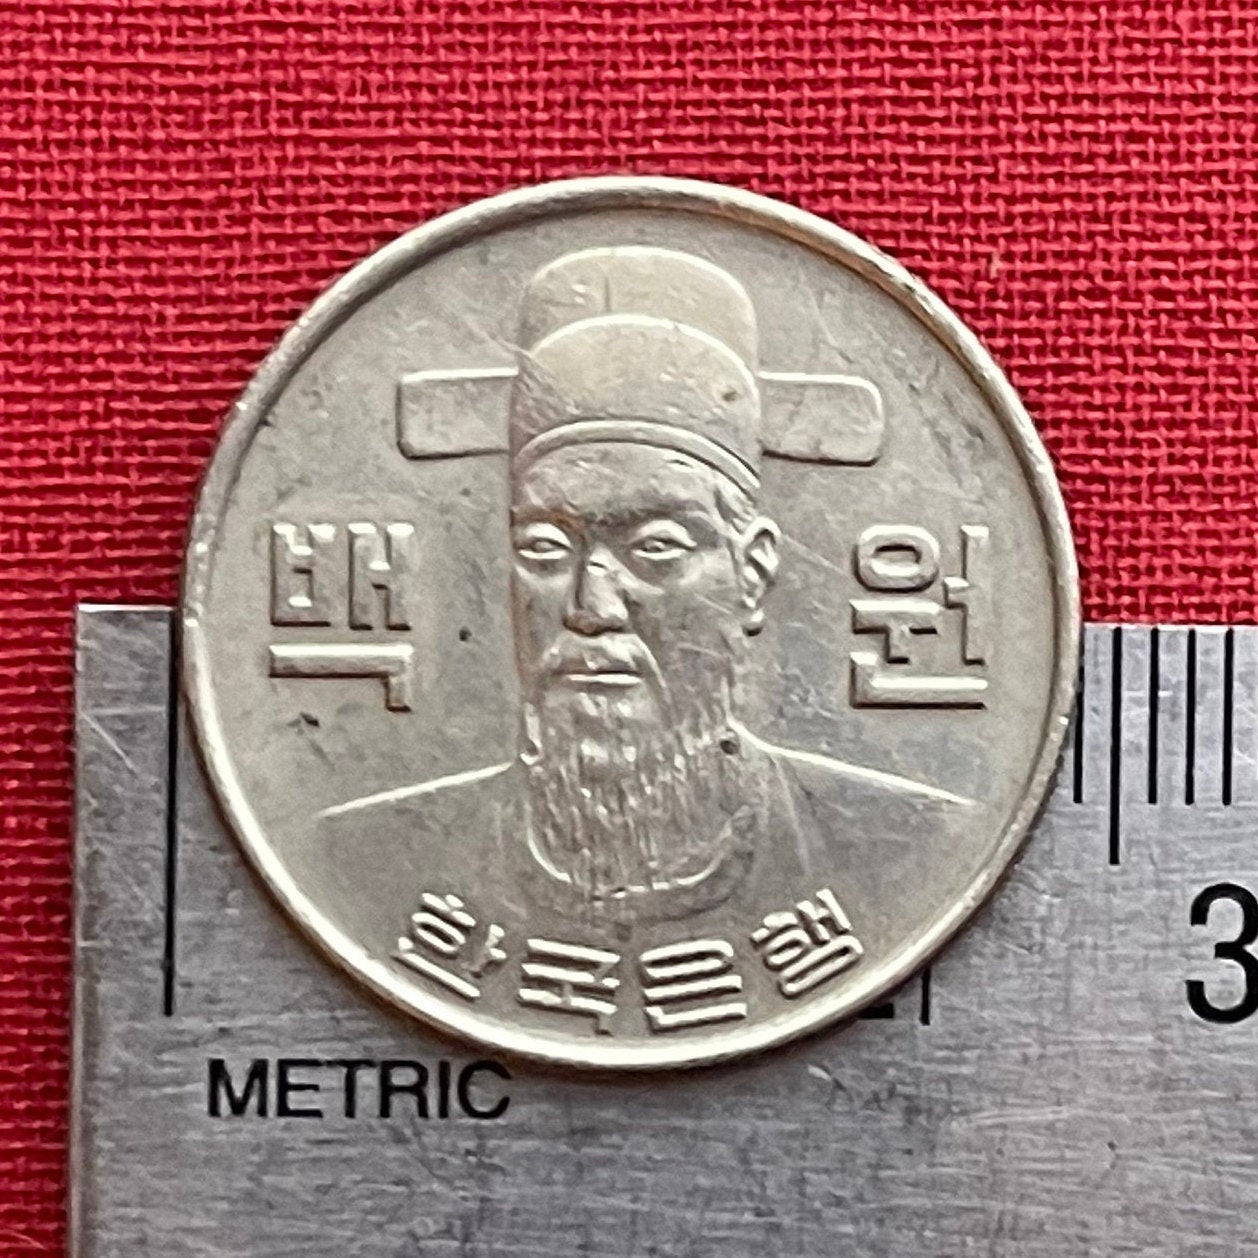 Admiral Yi Sun-sin 100 Won Korea Authentic Coin Money for Jewelry and Craft Making (National Hero) (South Korea) (Anti-imperialist)